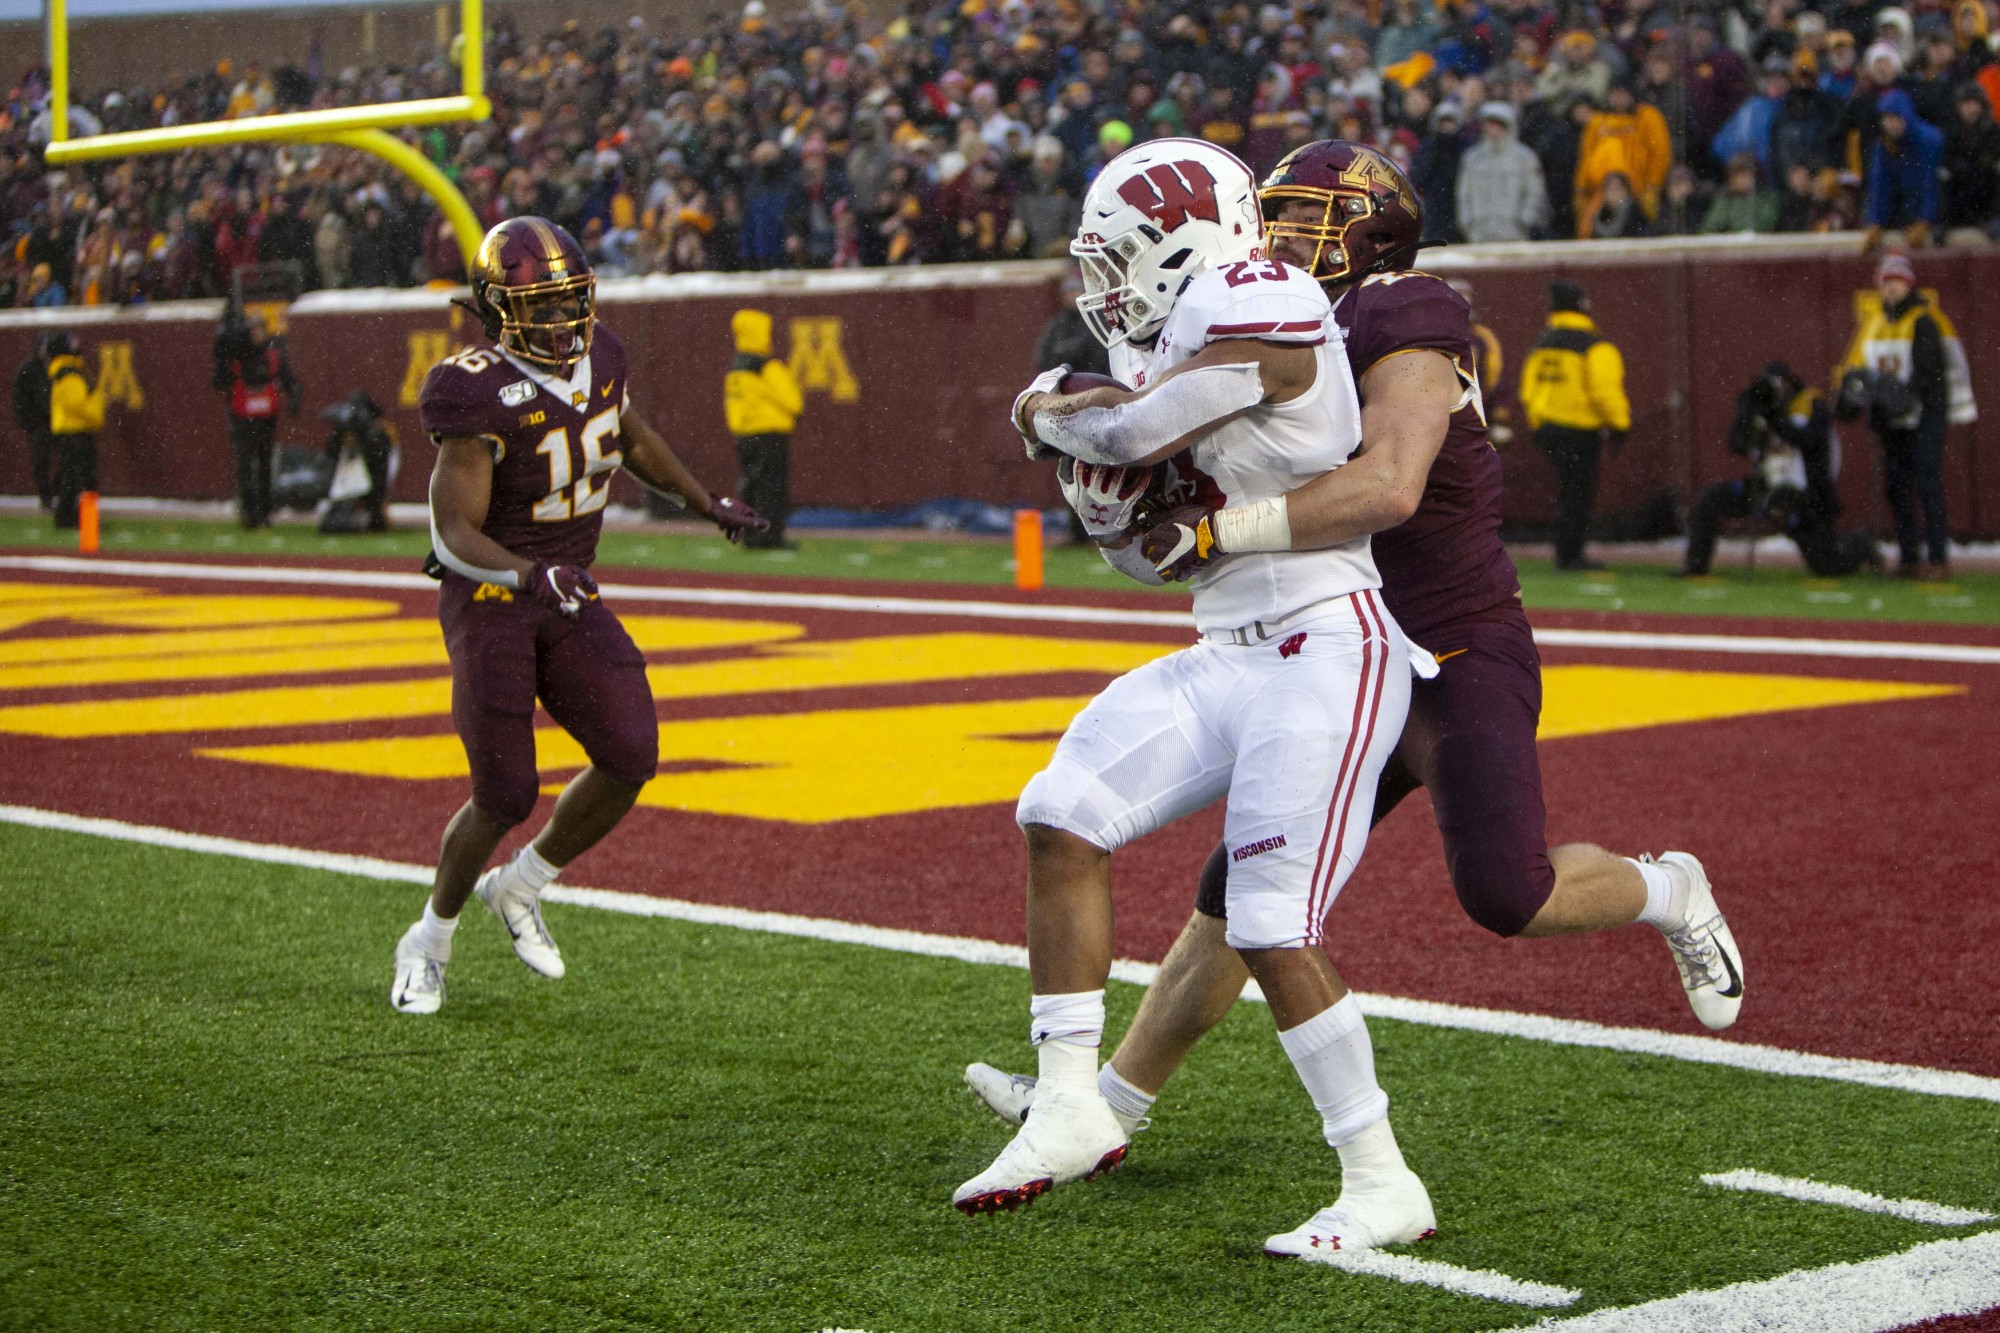 Wisconsin scores a touchdown late in the second quarter at TCF Bank Stadium Saturday, Nov. 30. 